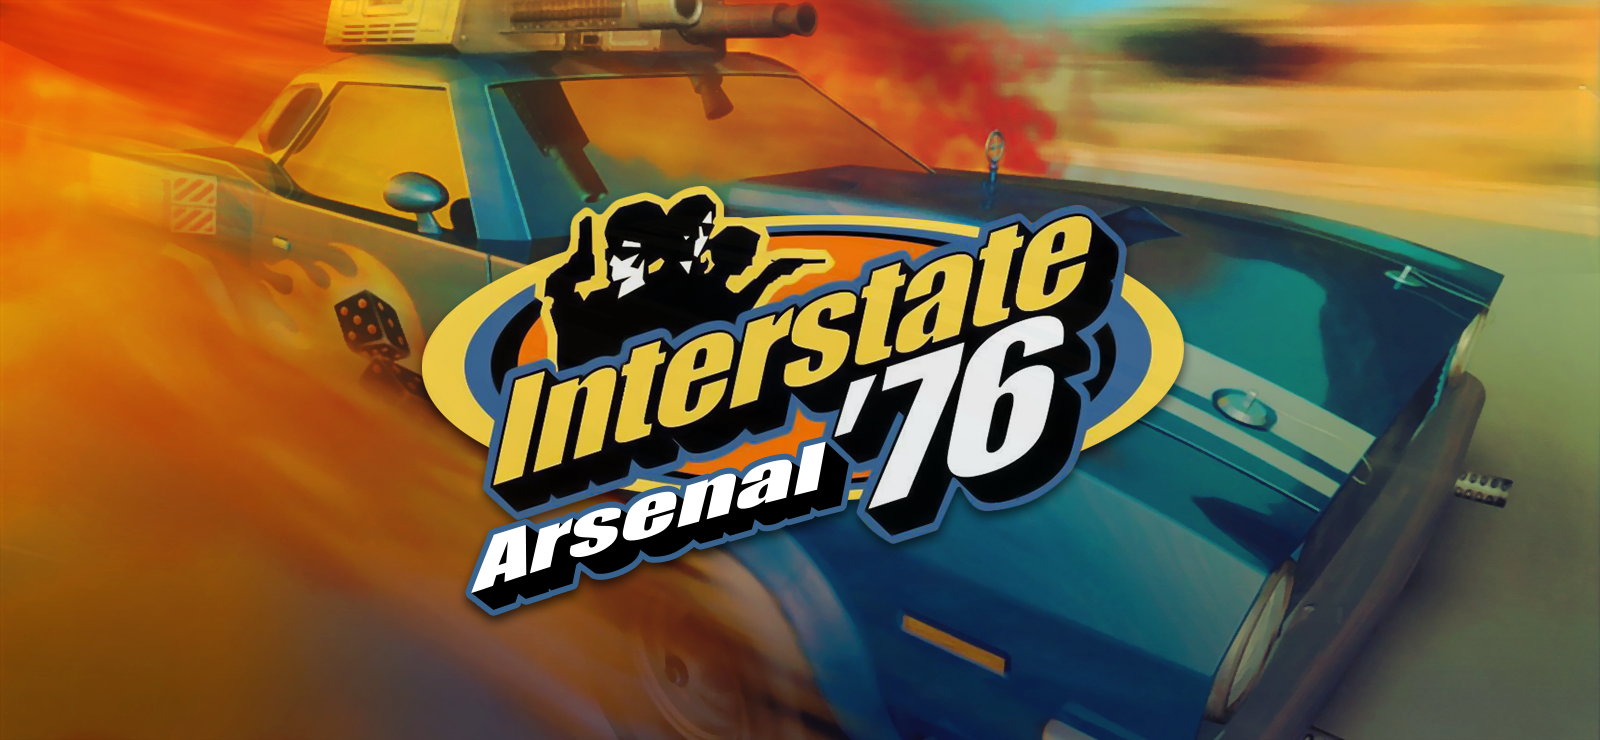 Interstate ’76® The Arsenal